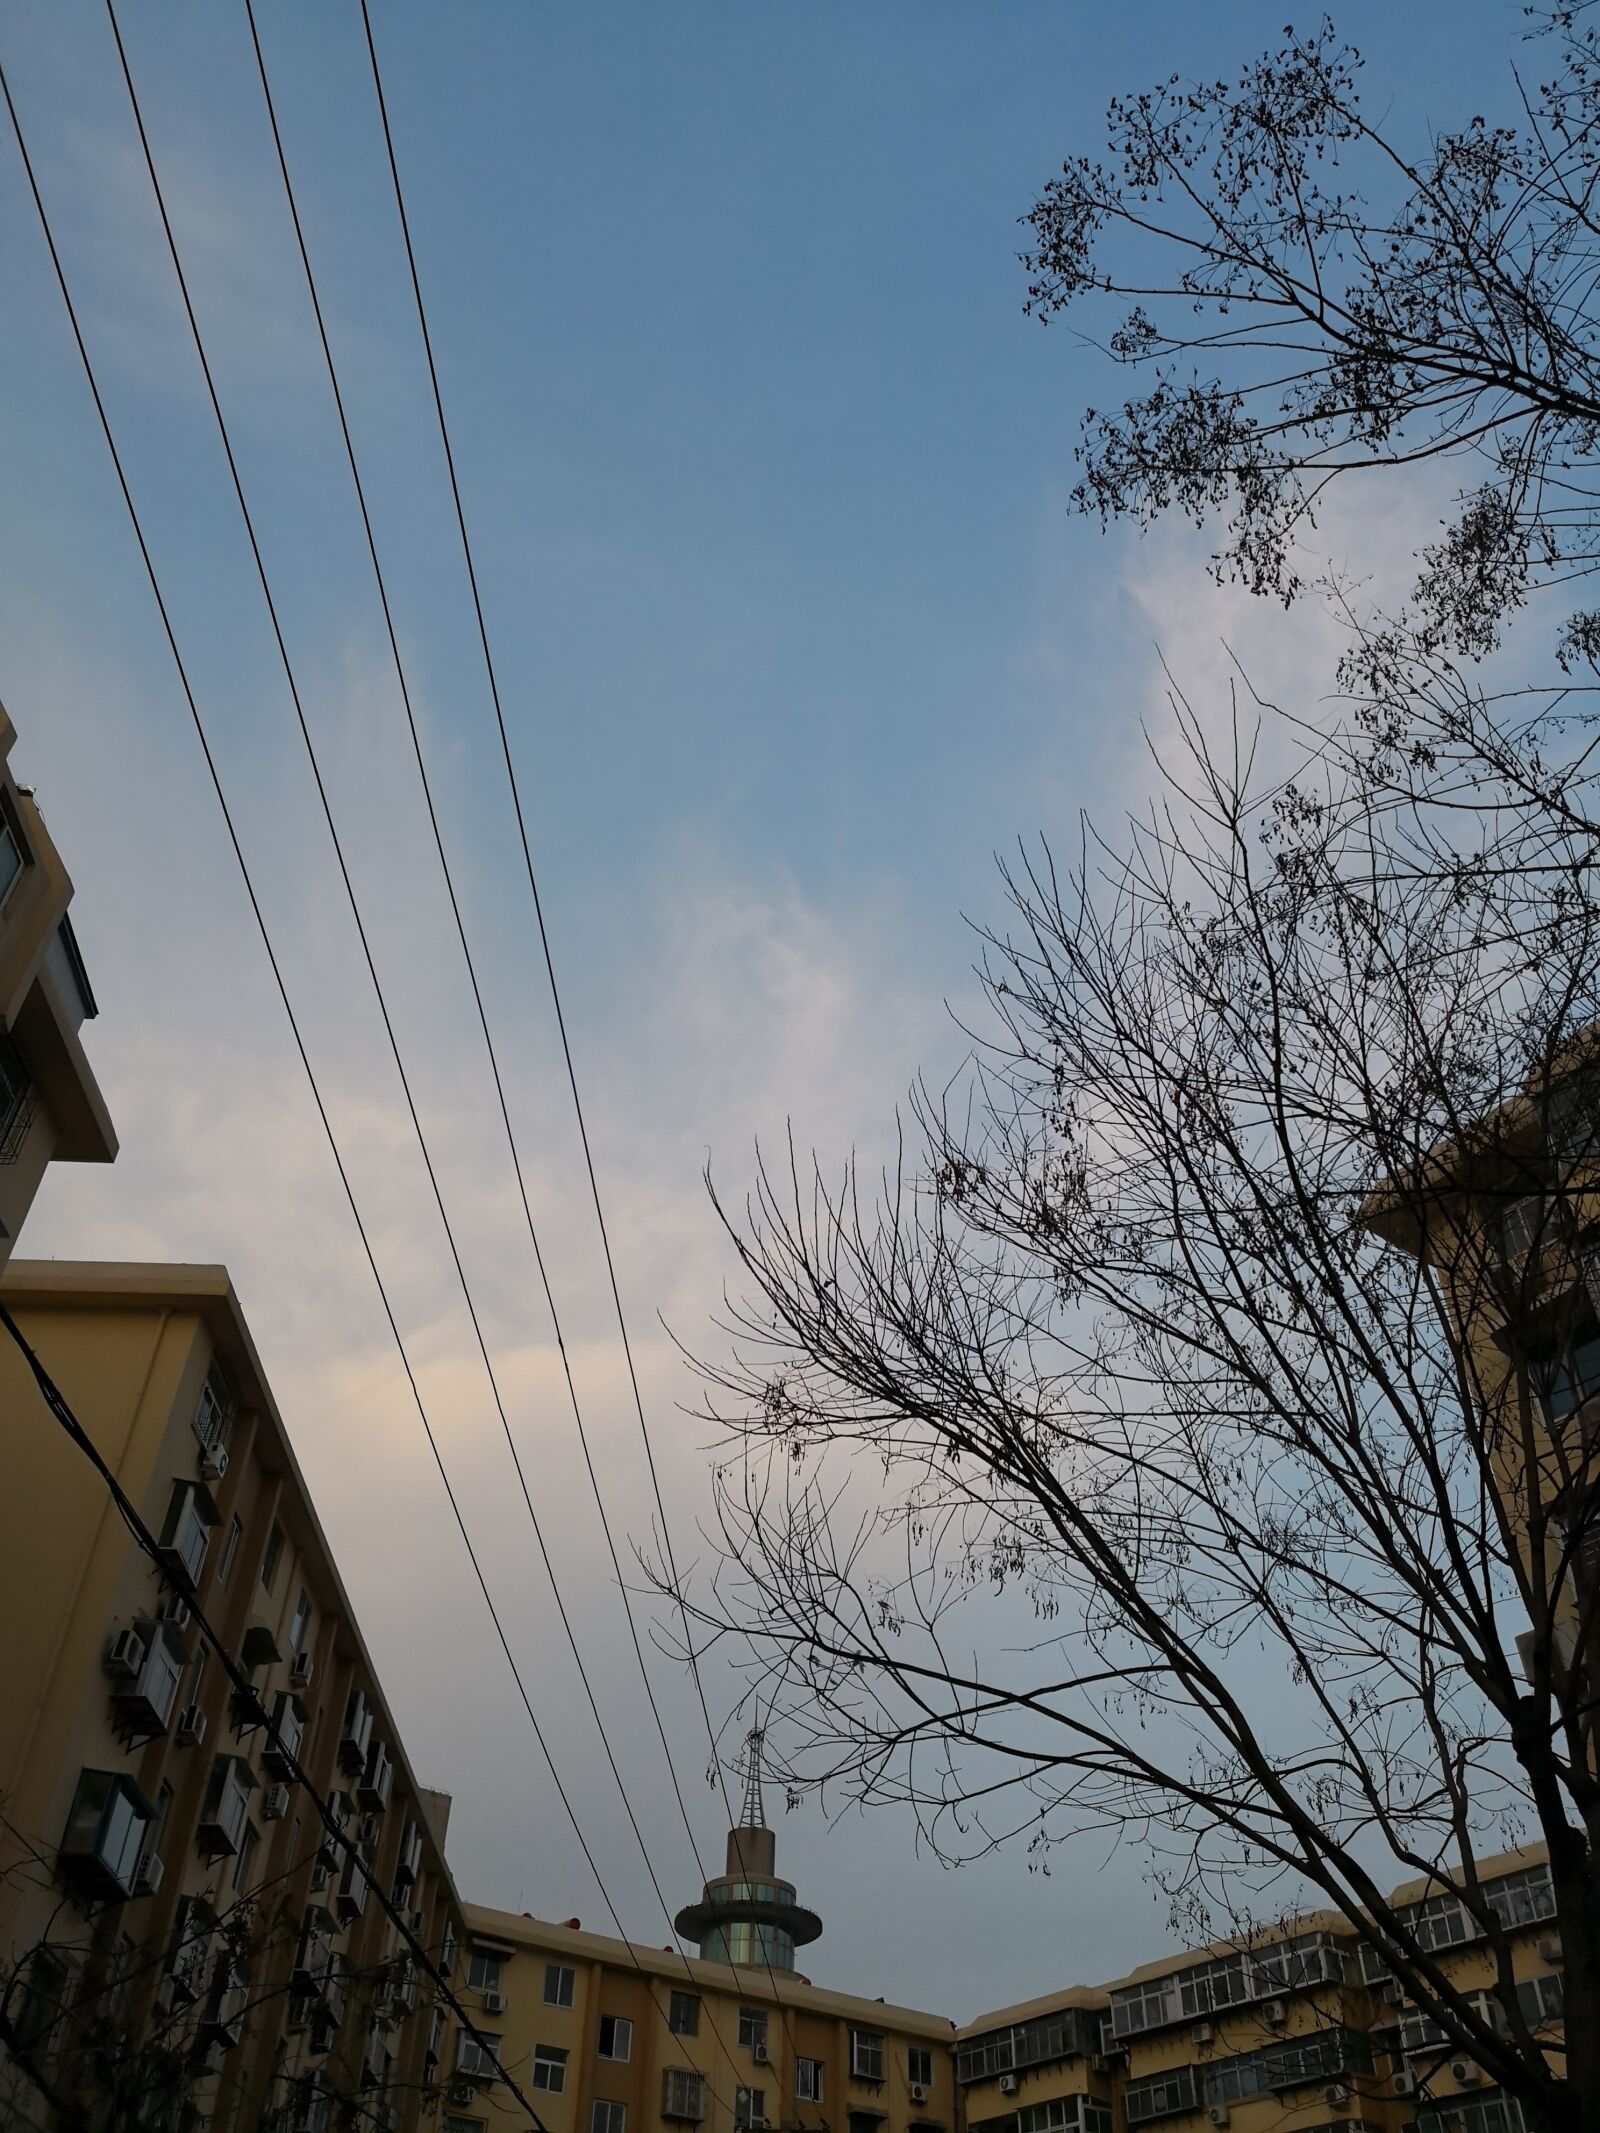 HUAWEI Mate 10 sample photo. Sky, wire, residents of photography